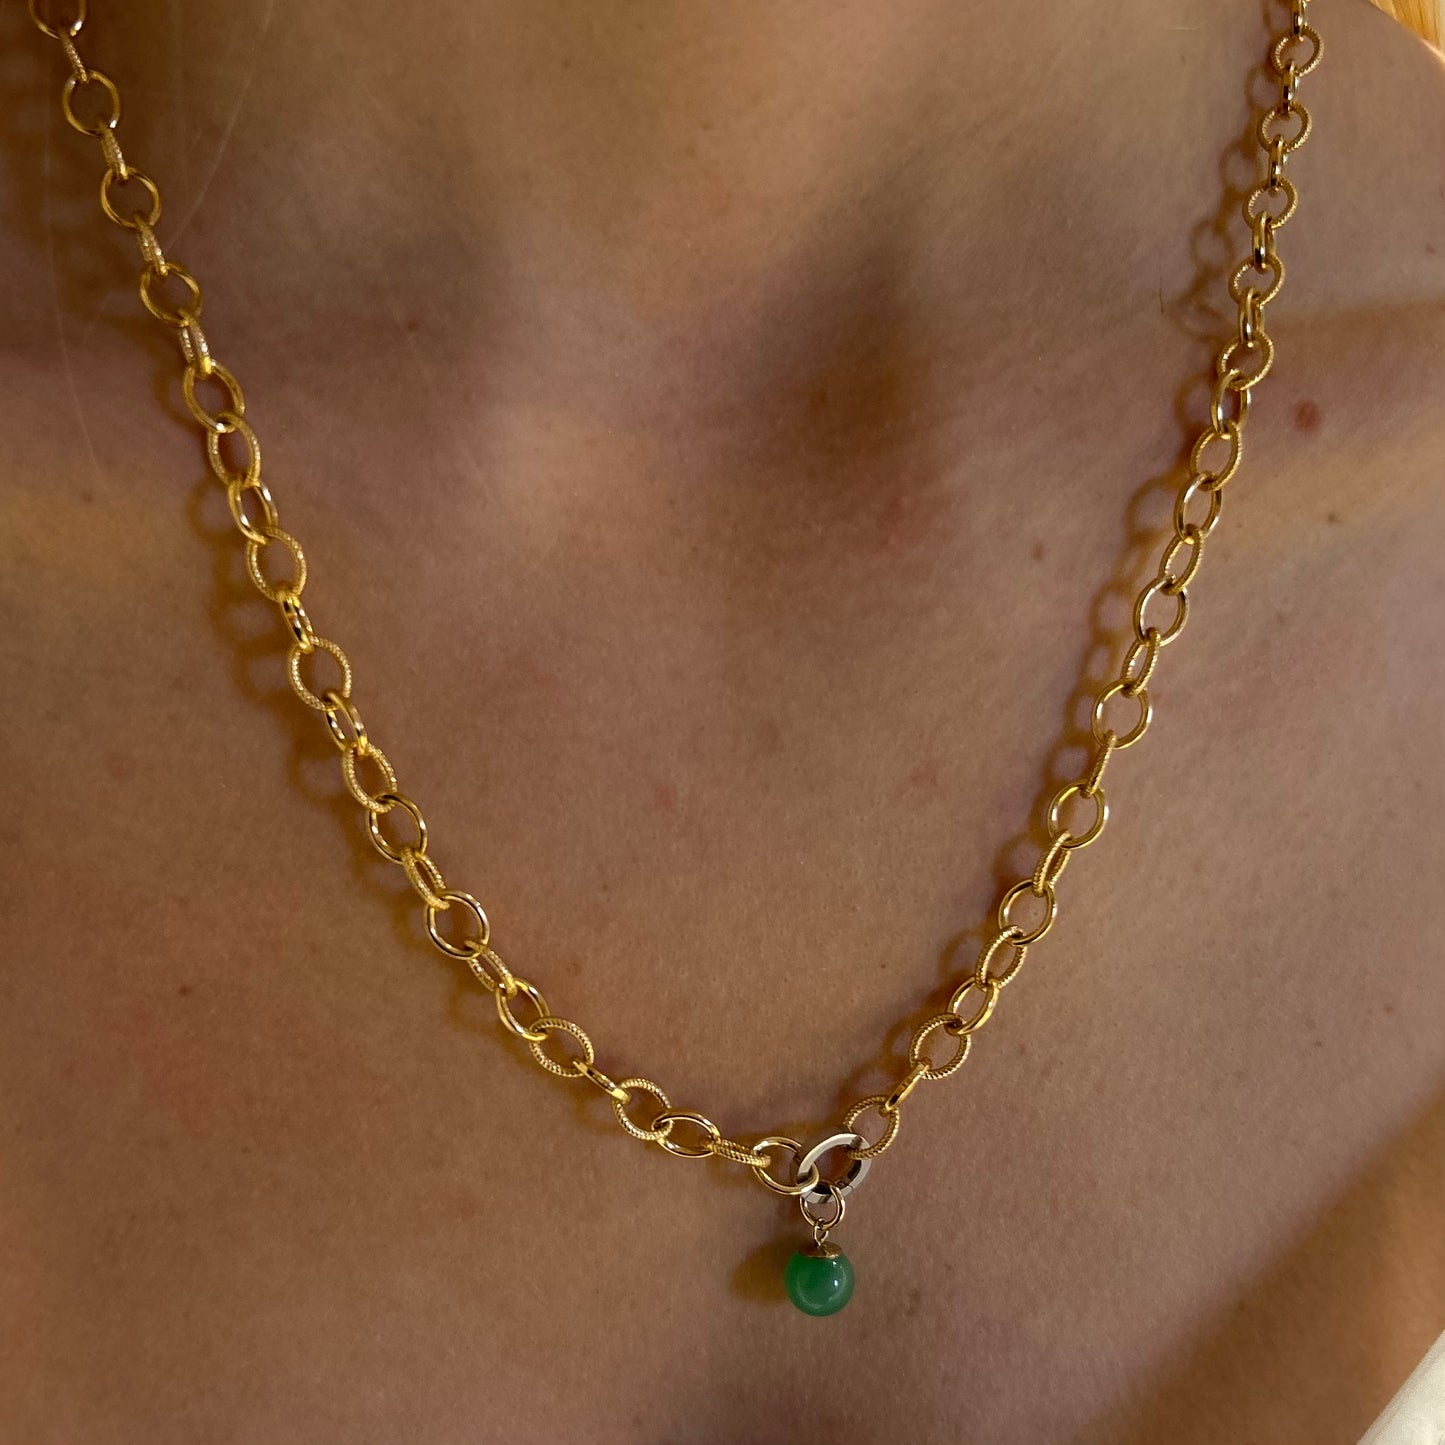 Chunky textured 14k gold filled chain with 14k white gold shortener and jade pendant